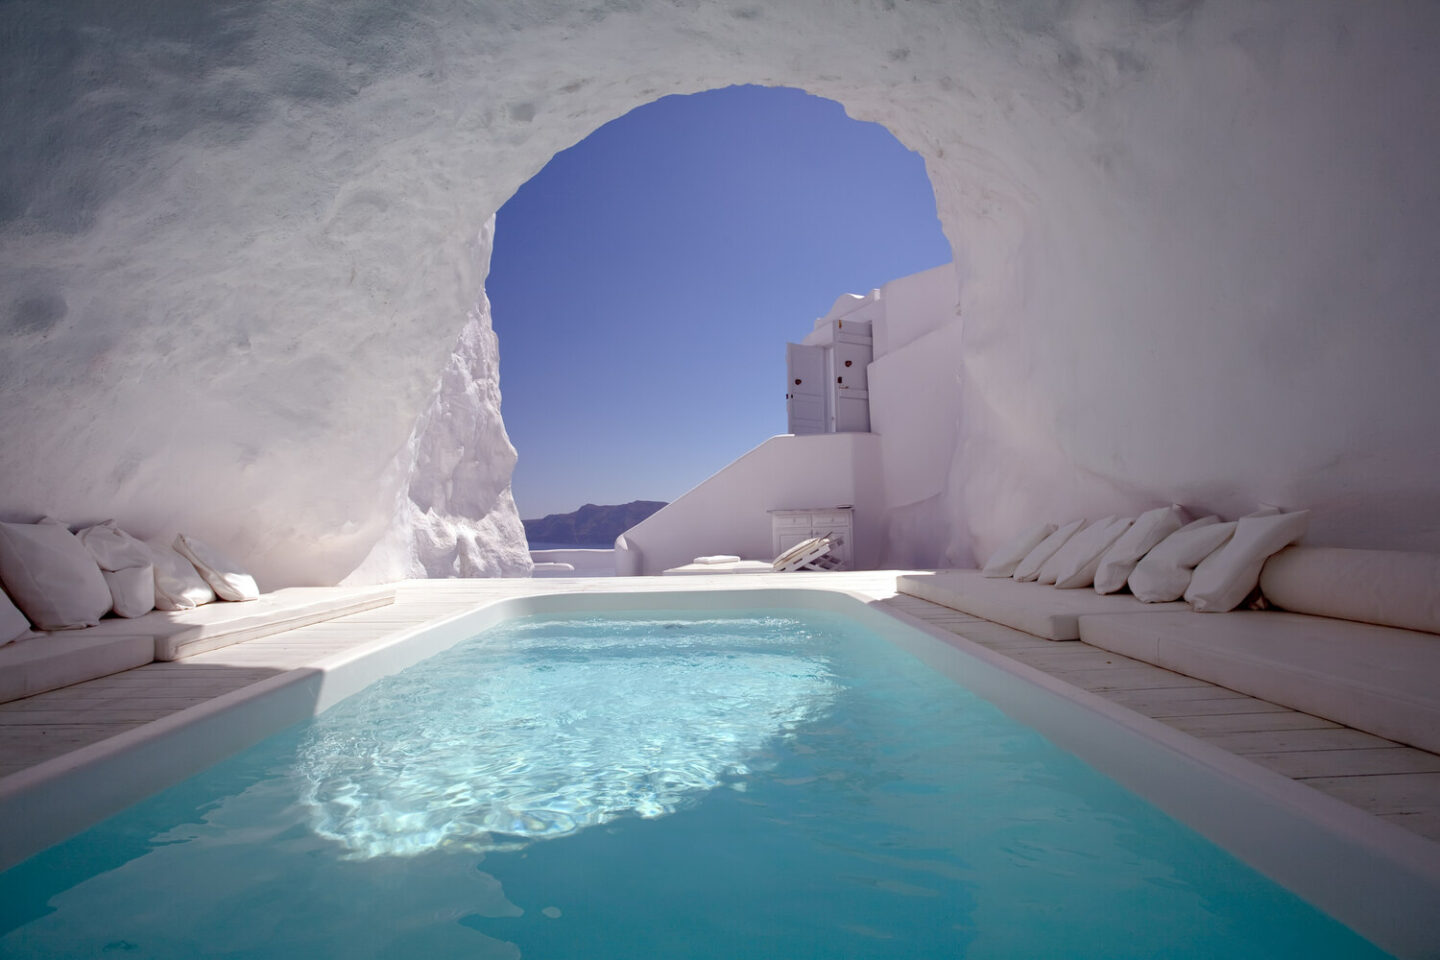 santorini hotels with cave pool, santorini hotels with cave pools